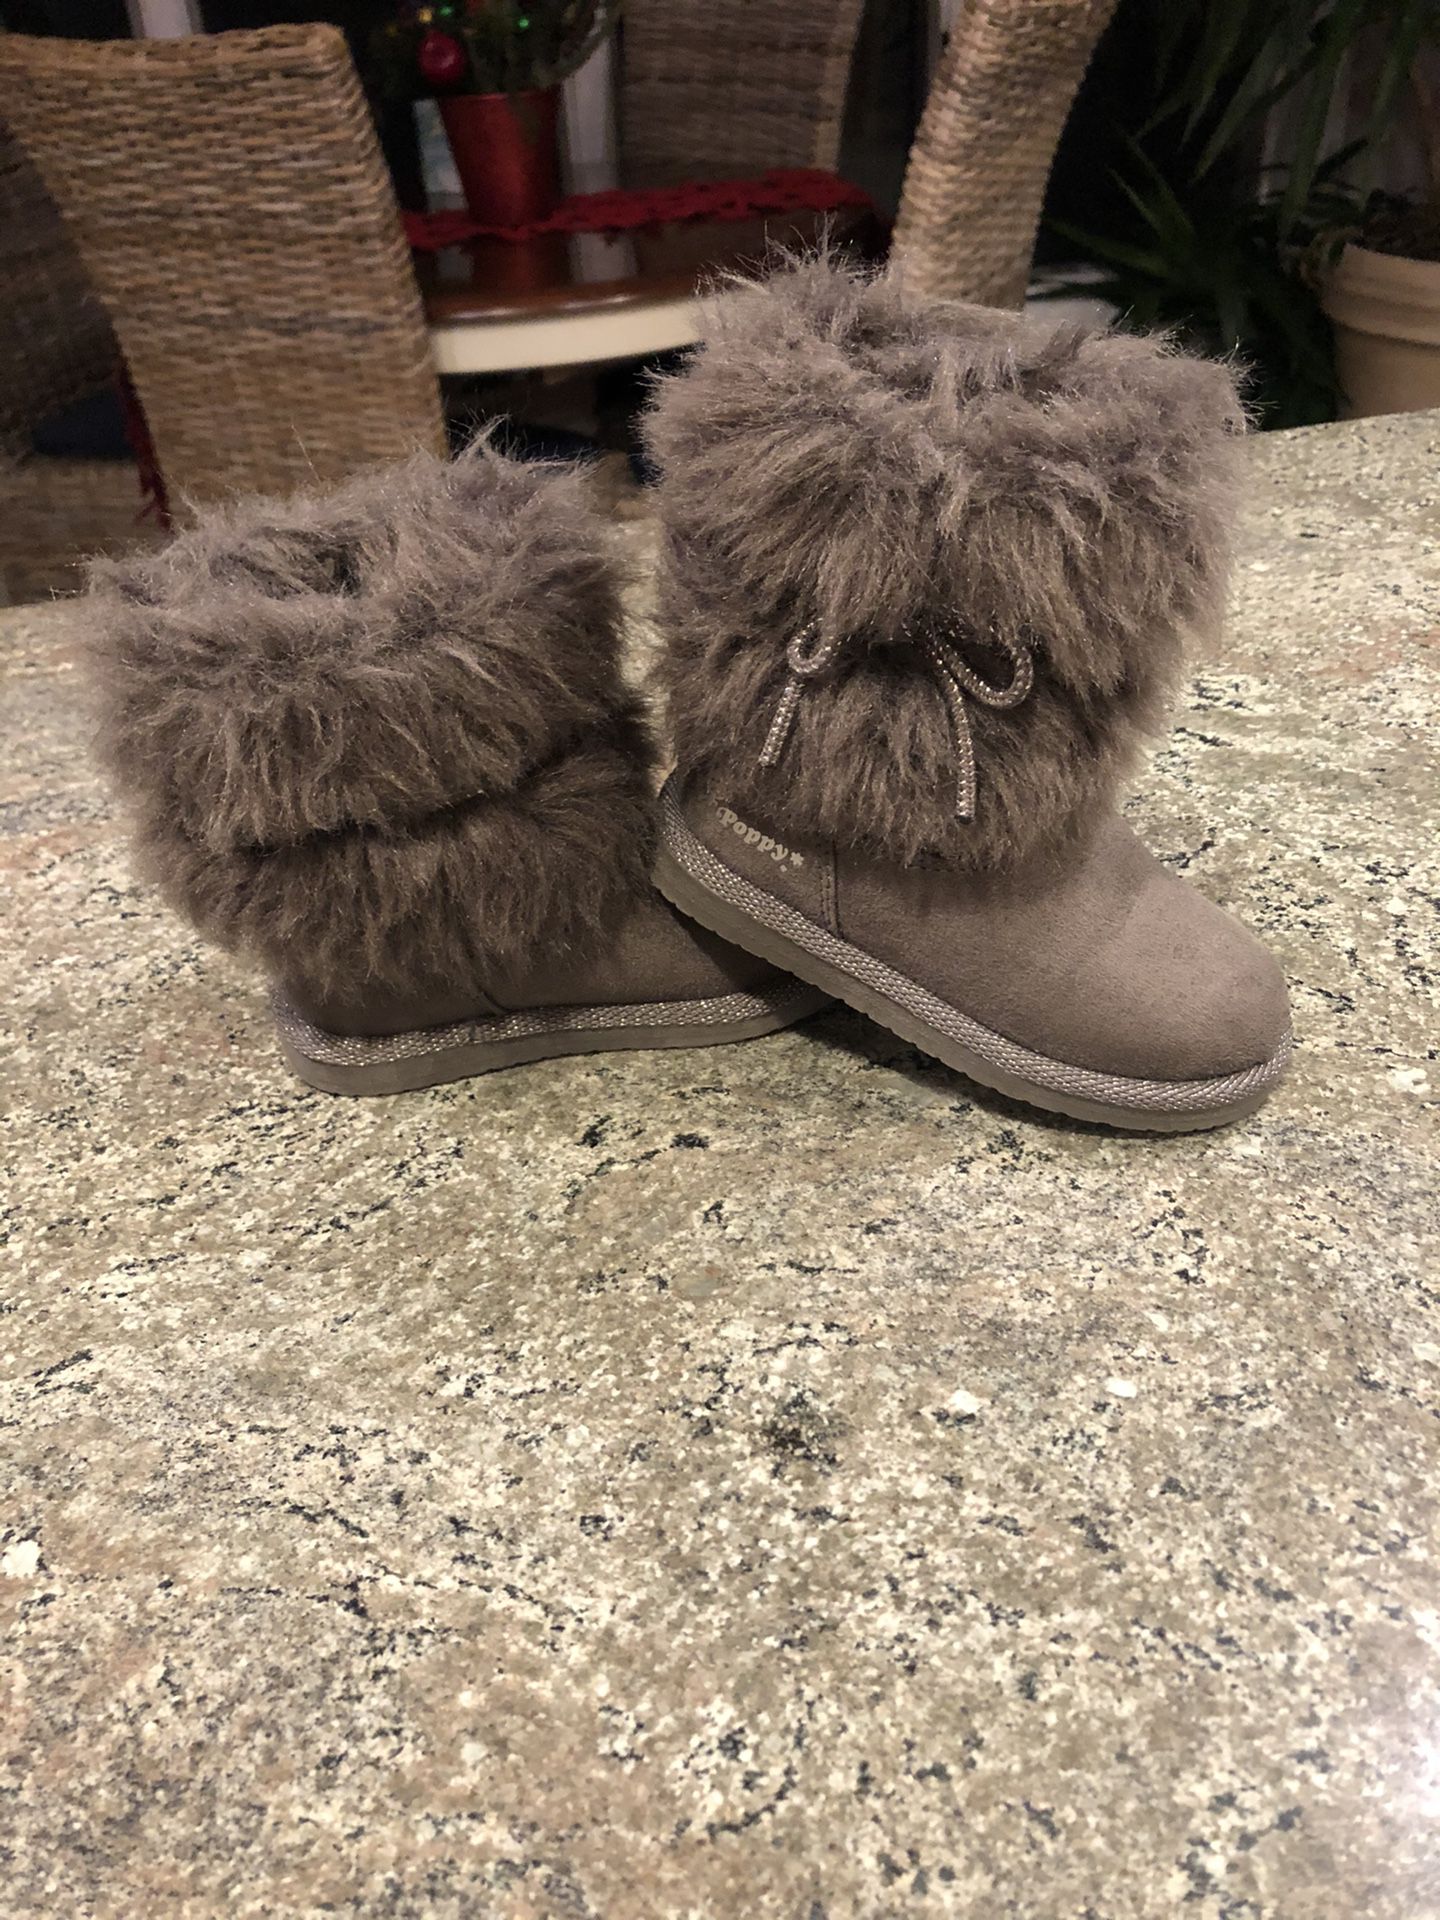 Toddler Girls Trolls Boots Faux Fur Size 8 Warm And Comfy Princess Poppy.